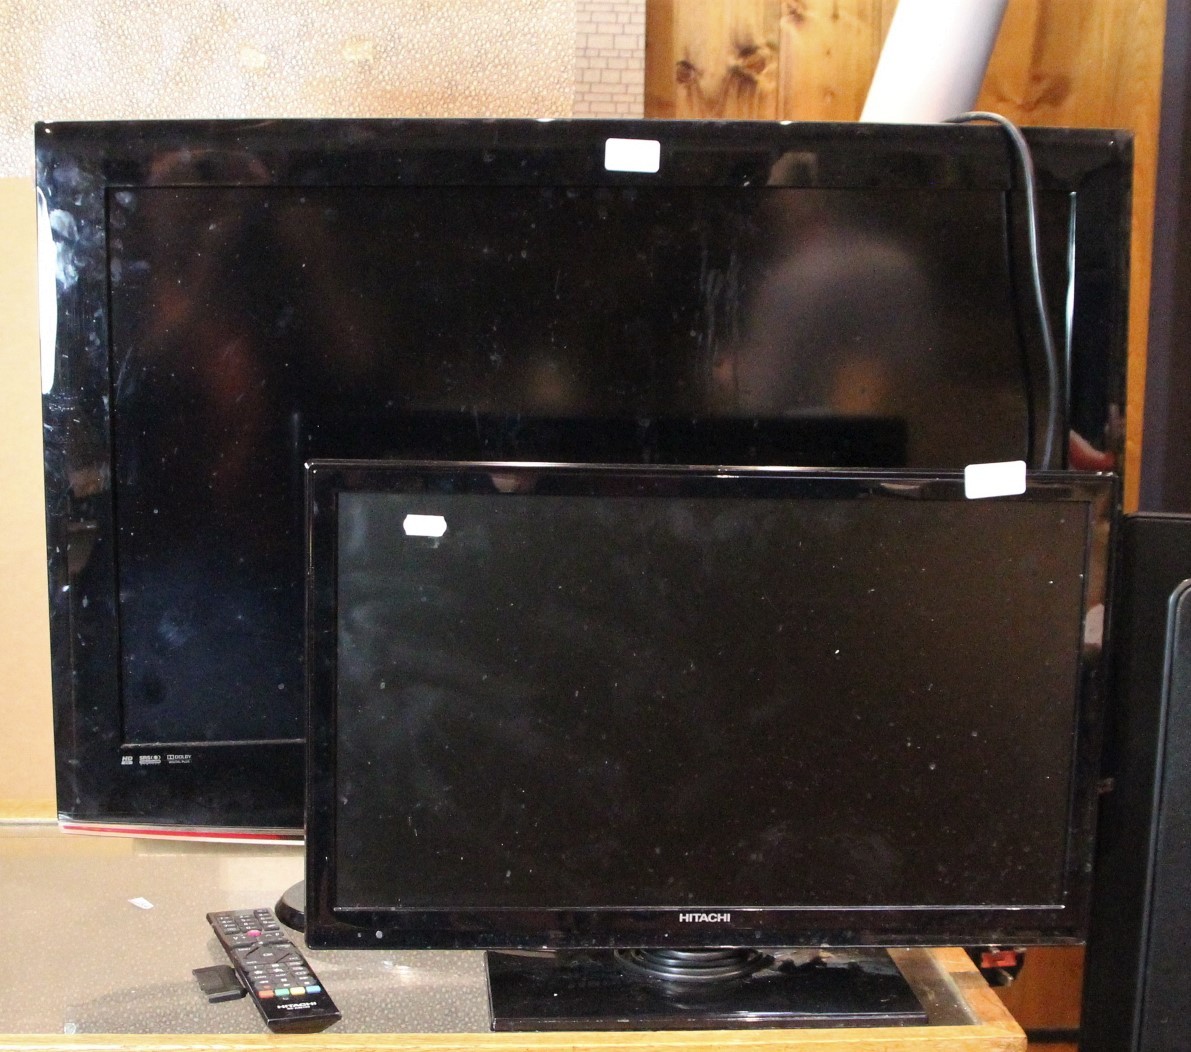 A Samsung 32inch TV (model number LE32B450C4W), together with an Hitachi 22inch TV (model number